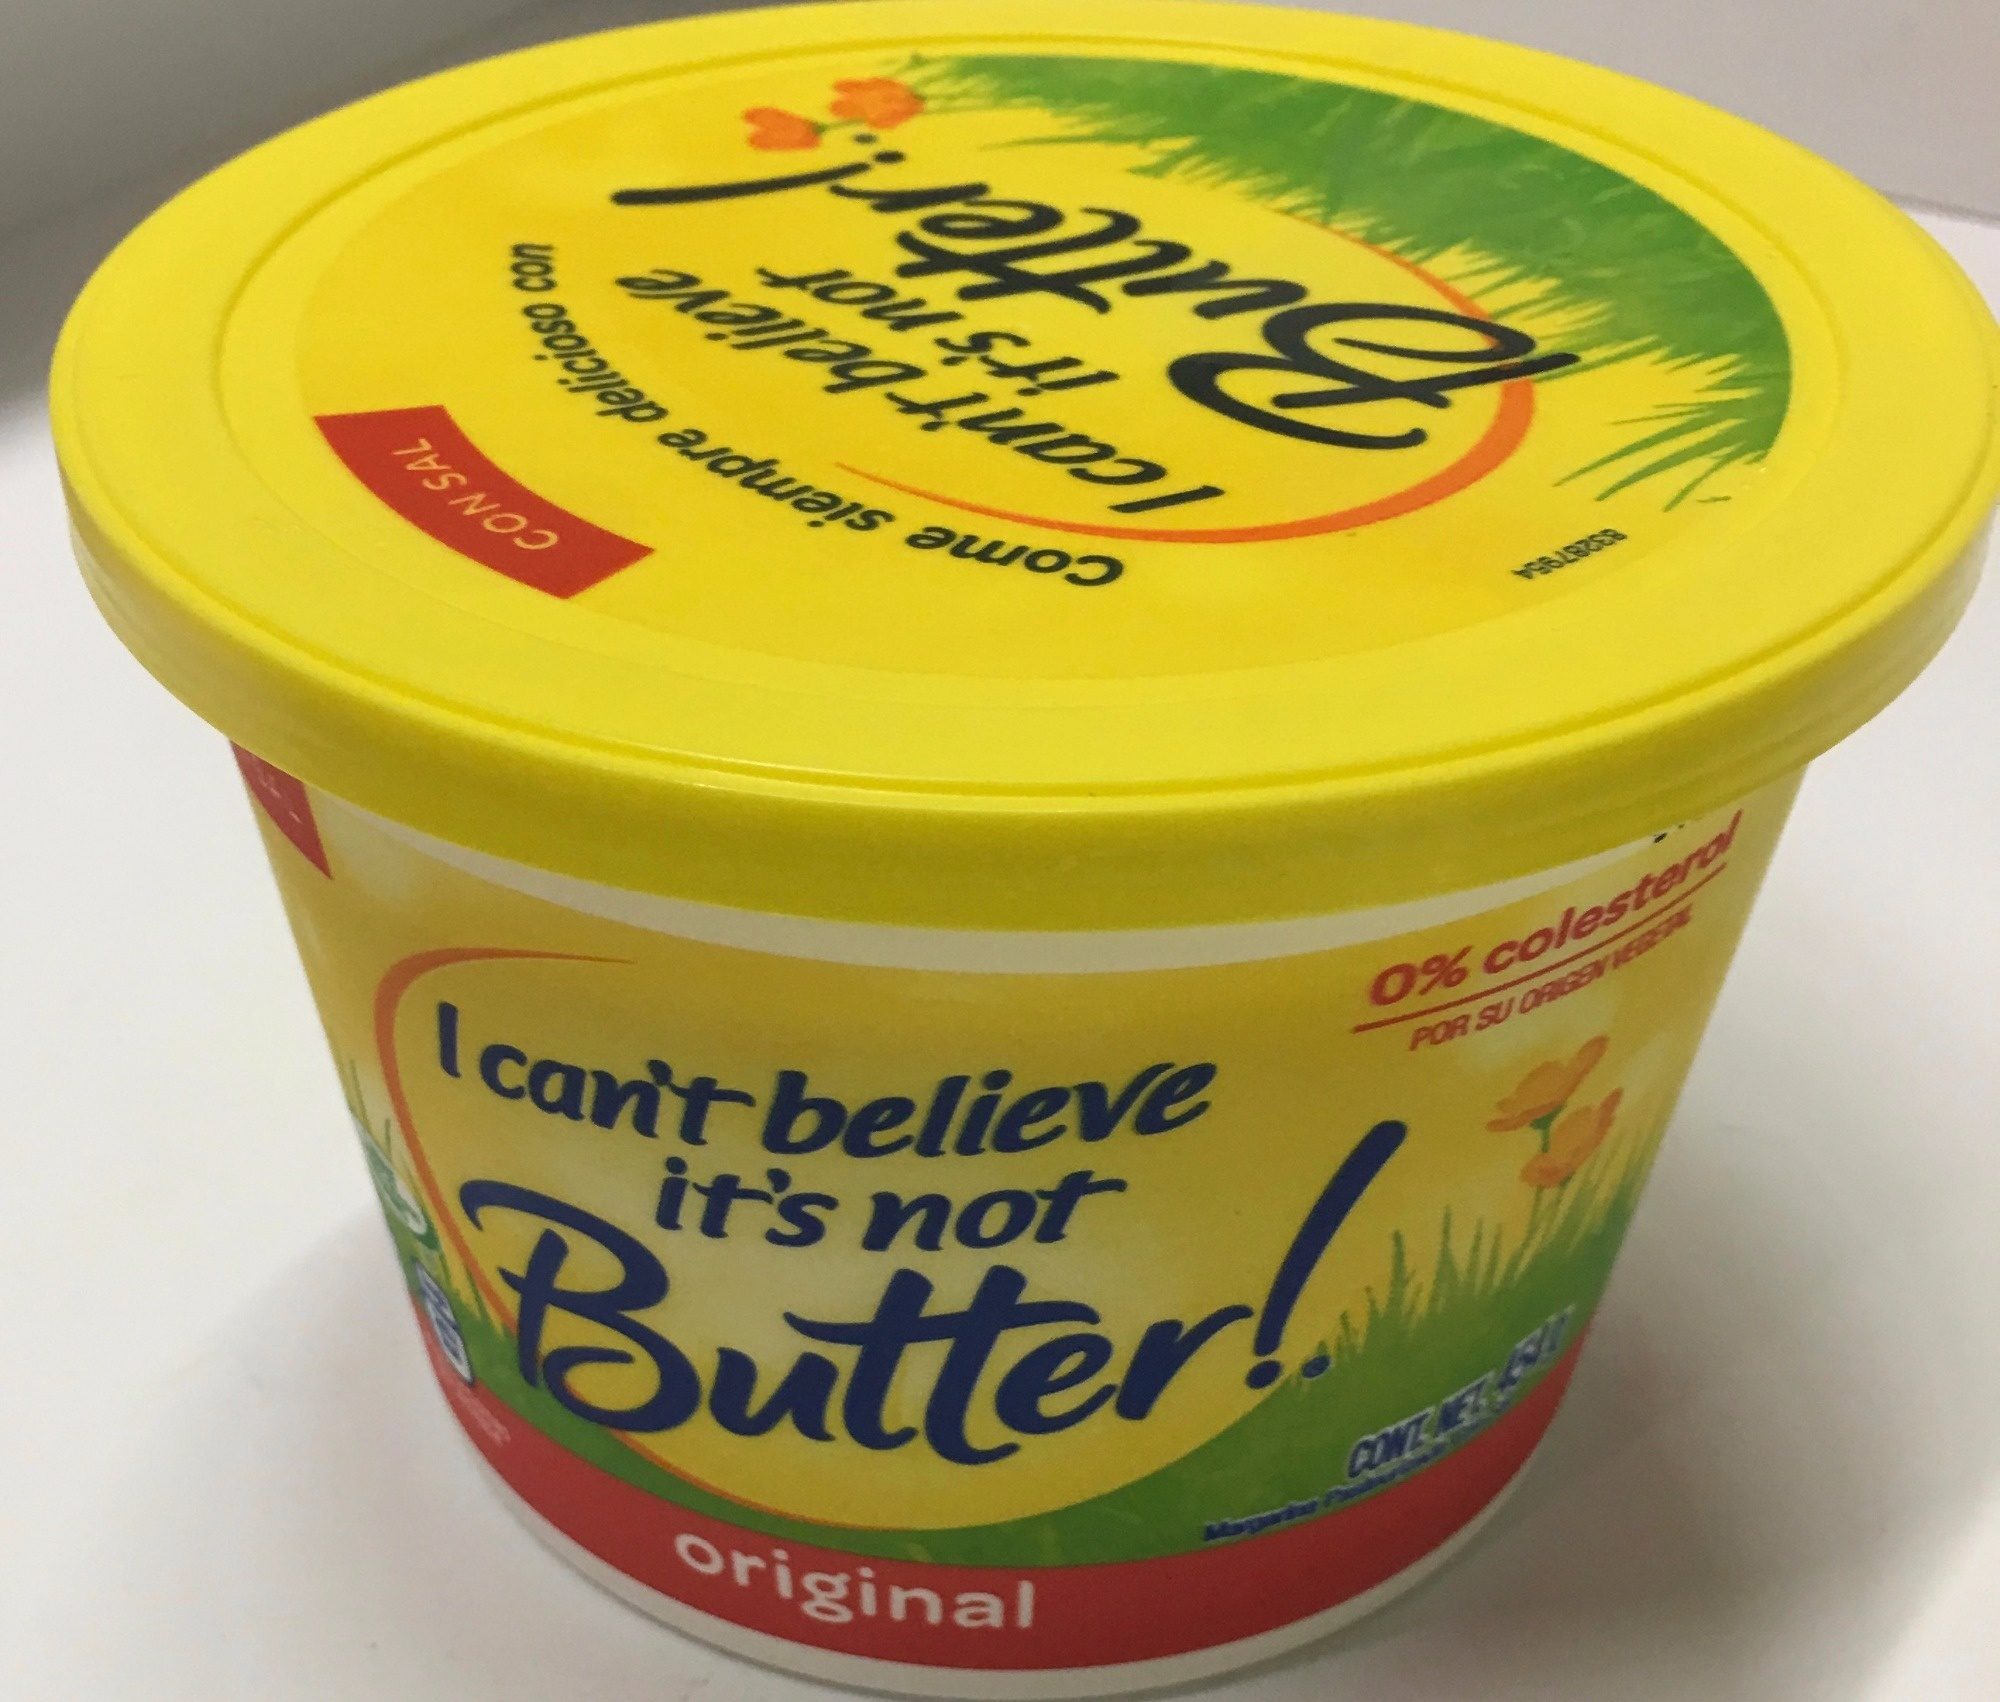 I can't believe it's not butter!, 45% vegetable oil spread, original - Producto